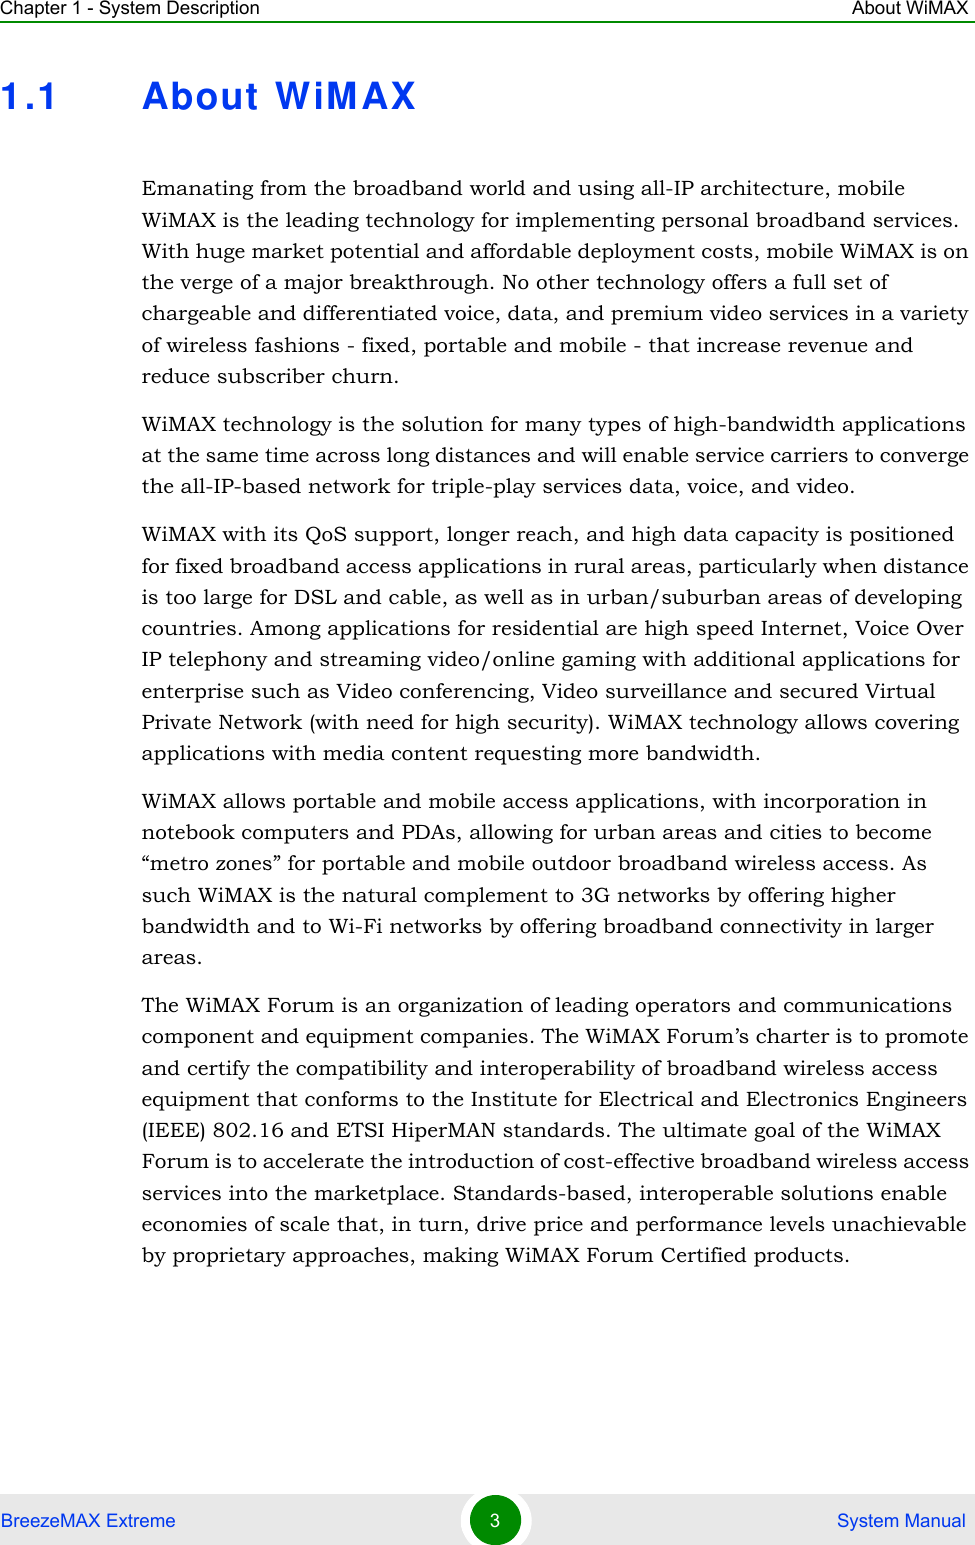 Chapter 1 - System Description About WiMAXBreezeMAX Extreme 3 System Manual1.1 About WiMAXEmanating from the broadband world and using all-IP architecture, mobile WiMAX is the leading technology for implementing personal broadband services. With huge market potential and affordable deployment costs, mobile WiMAX is on the verge of a major breakthrough. No other technology offers a full set of chargeable and differentiated voice, data, and premium video services in a variety of wireless fashions - fixed, portable and mobile - that increase revenue and reduce subscriber churn.WiMAX technology is the solution for many types of high-bandwidth applications at the same time across long distances and will enable service carriers to converge the all-IP-based network for triple-play services data, voice, and video.WiMAX with its QoS support, longer reach, and high data capacity is positioned for fixed broadband access applications in rural areas, particularly when distance is too large for DSL and cable, as well as in urban/suburban areas of developing countries. Among applications for residential are high speed Internet, Voice Over IP telephony and streaming video/online gaming with additional applications for enterprise such as Video conferencing, Video surveillance and secured Virtual Private Network (with need for high security). WiMAX technology allows covering applications with media content requesting more bandwidth.WiMAX allows portable and mobile access applications, with incorporation in notebook computers and PDAs, allowing for urban areas and cities to become “metro zones” for portable and mobile outdoor broadband wireless access. As such WiMAX is the natural complement to 3G networks by offering higher bandwidth and to Wi-Fi networks by offering broadband connectivity in larger areas.The WiMAX Forum is an organization of leading operators and communications component and equipment companies. The WiMAX Forum’s charter is to promote and certify the compatibility and interoperability of broadband wireless access equipment that conforms to the Institute for Electrical and Electronics Engineers (IEEE) 802.16 and ETSI HiperMAN standards. The ultimate goal of the WiMAX Forum is to accelerate the introduction of cost-effective broadband wireless access services into the marketplace. Standards-based, interoperable solutions enable economies of scale that, in turn, drive price and performance levels unachievable by proprietary approaches, making WiMAX Forum Certified products.